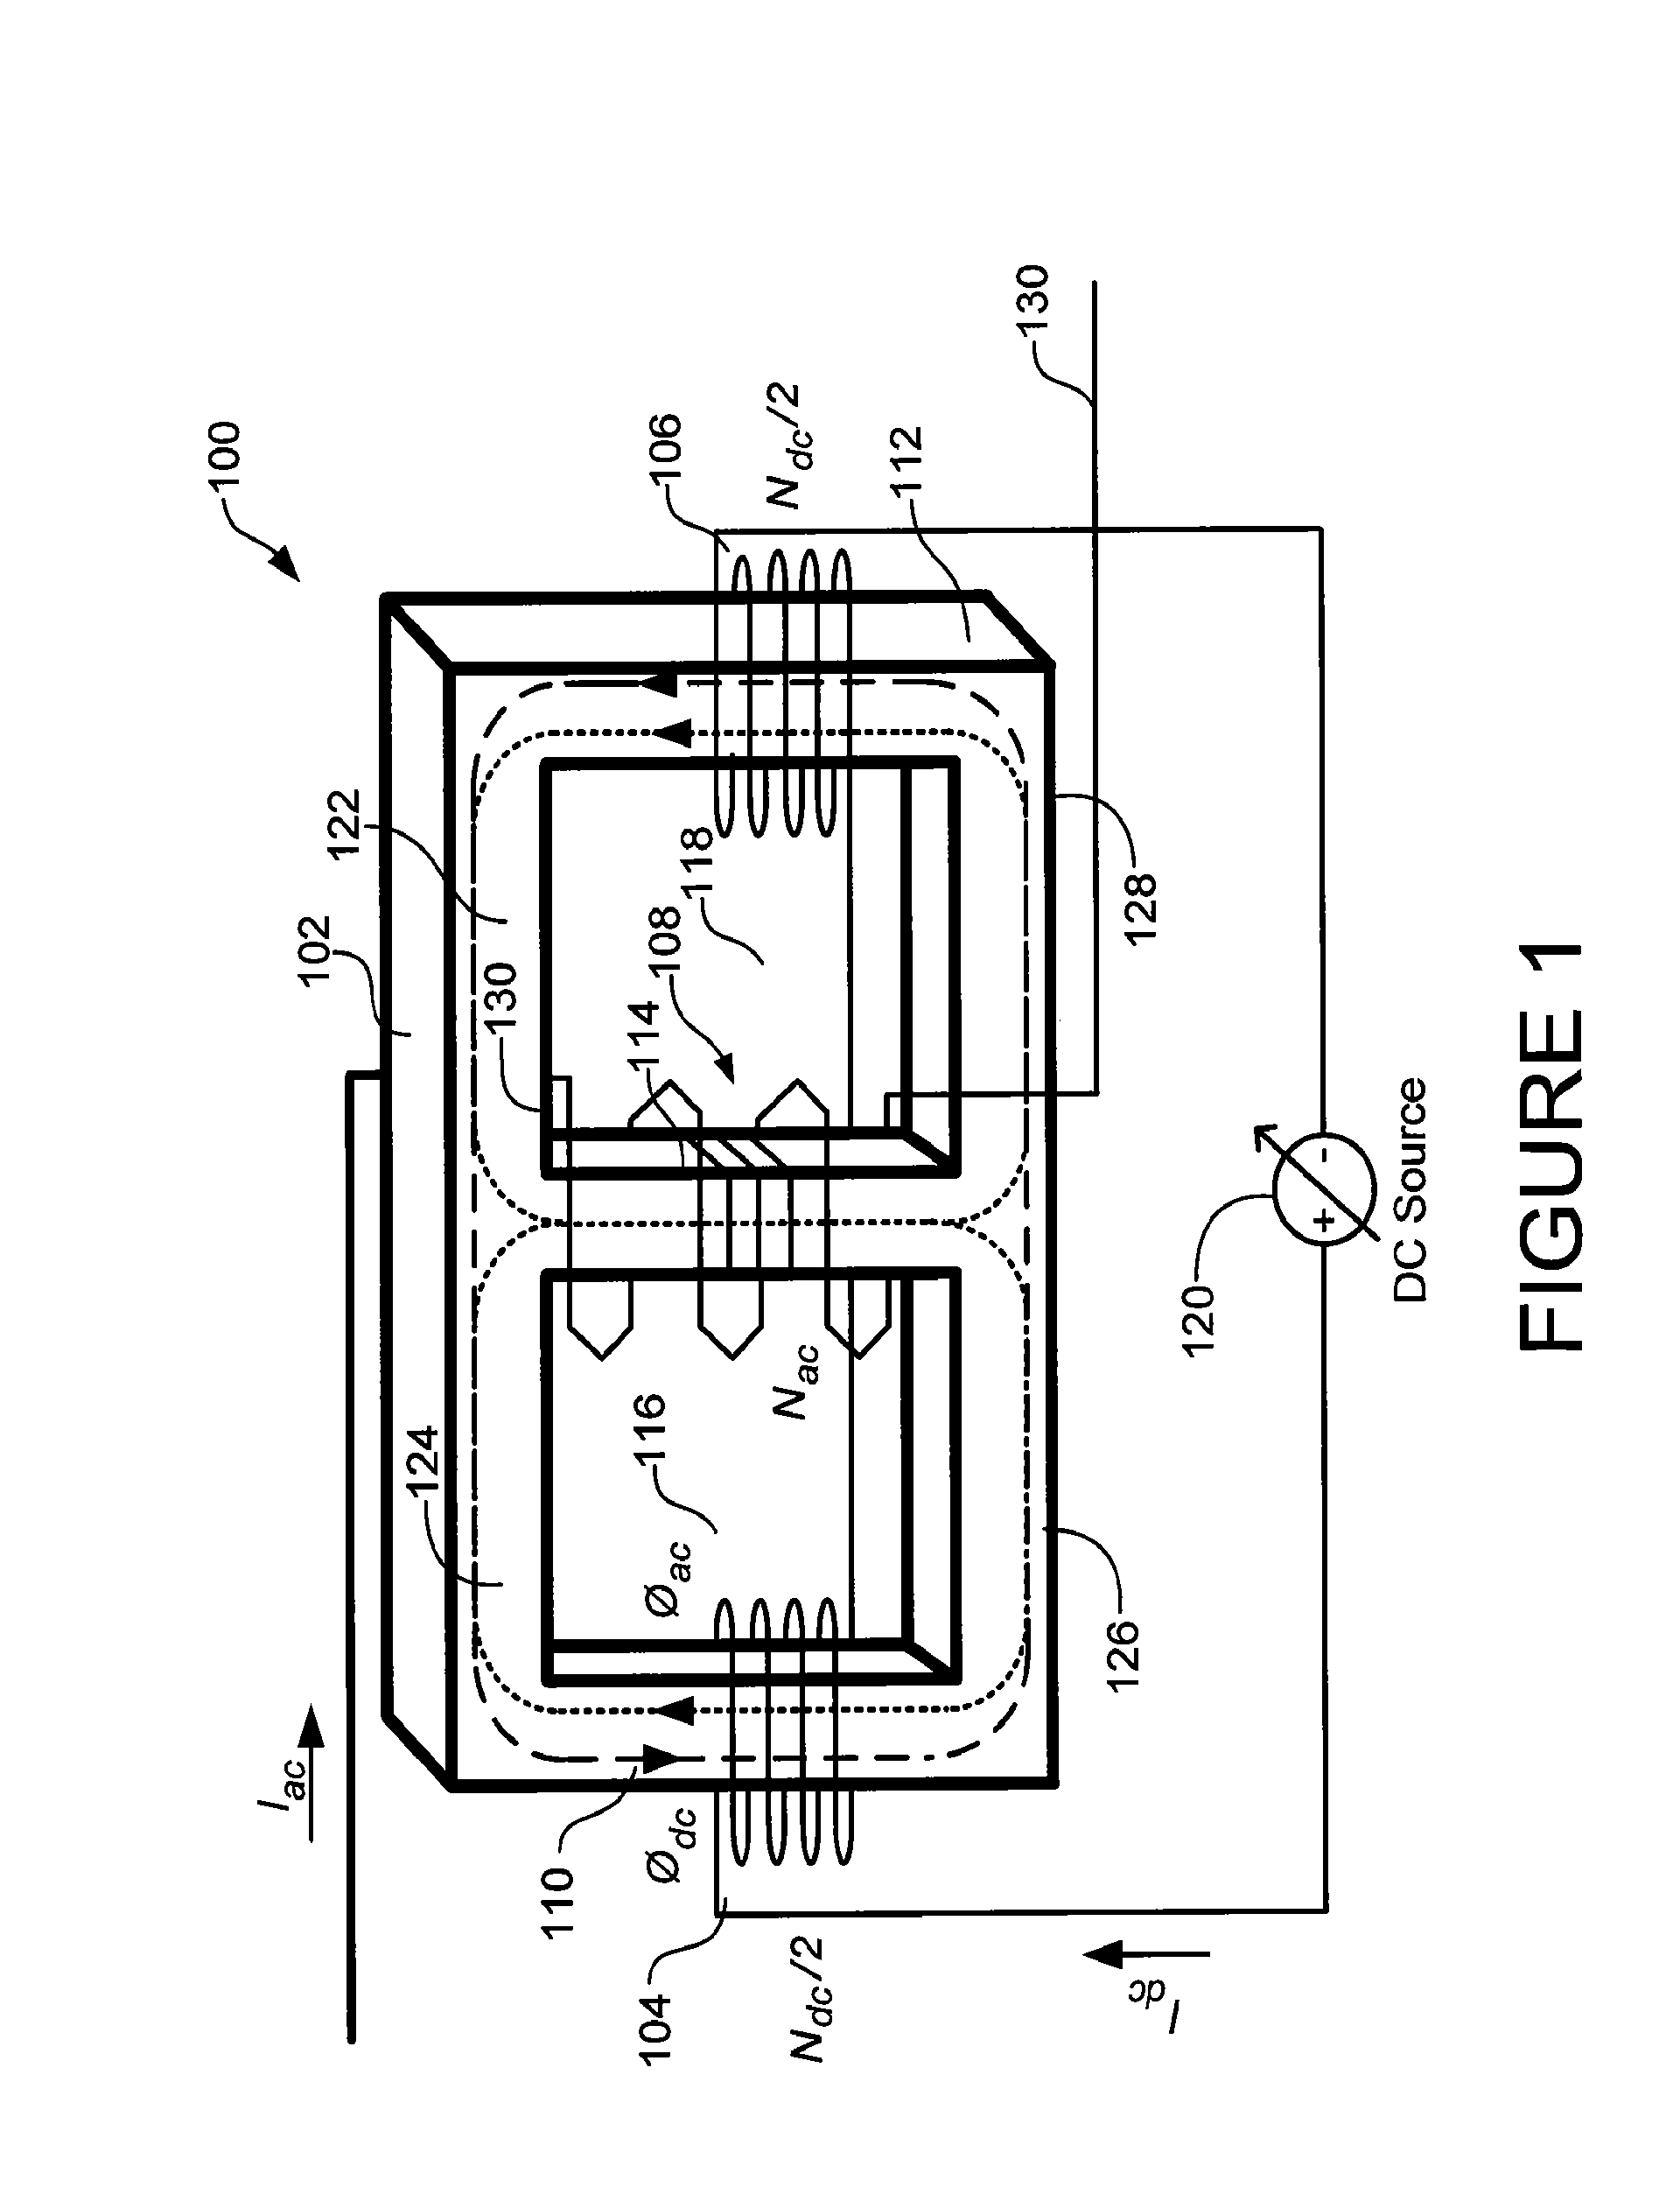 Power flow control using distributed saturable reactors